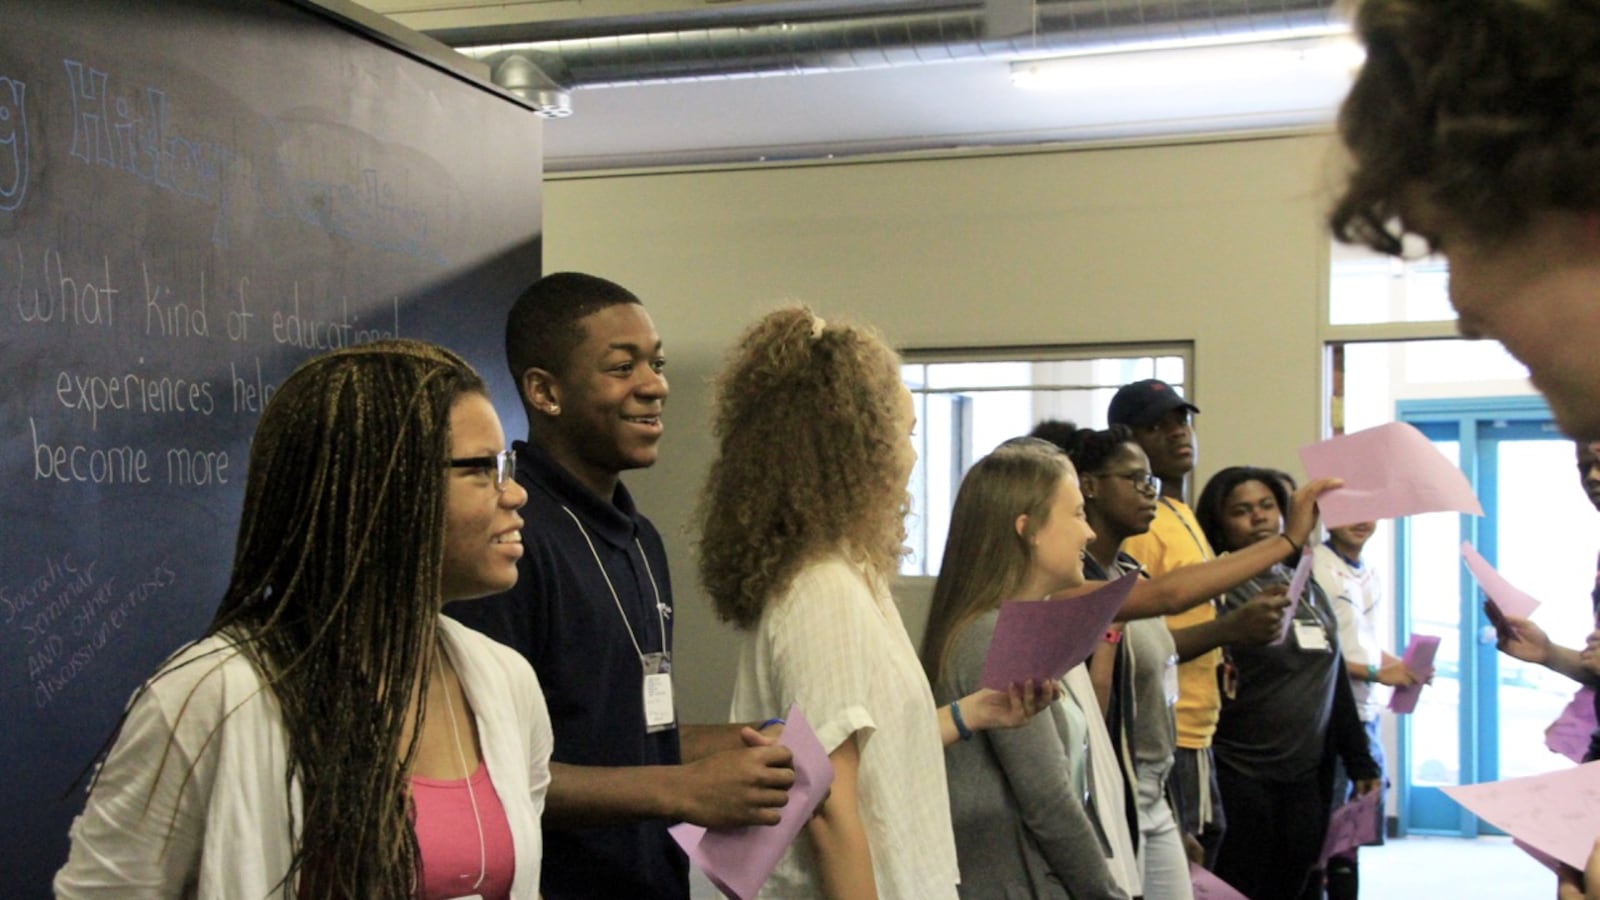 Memphis students talk about leadership qualities they admire at a training program with Facing History and Ourselves.